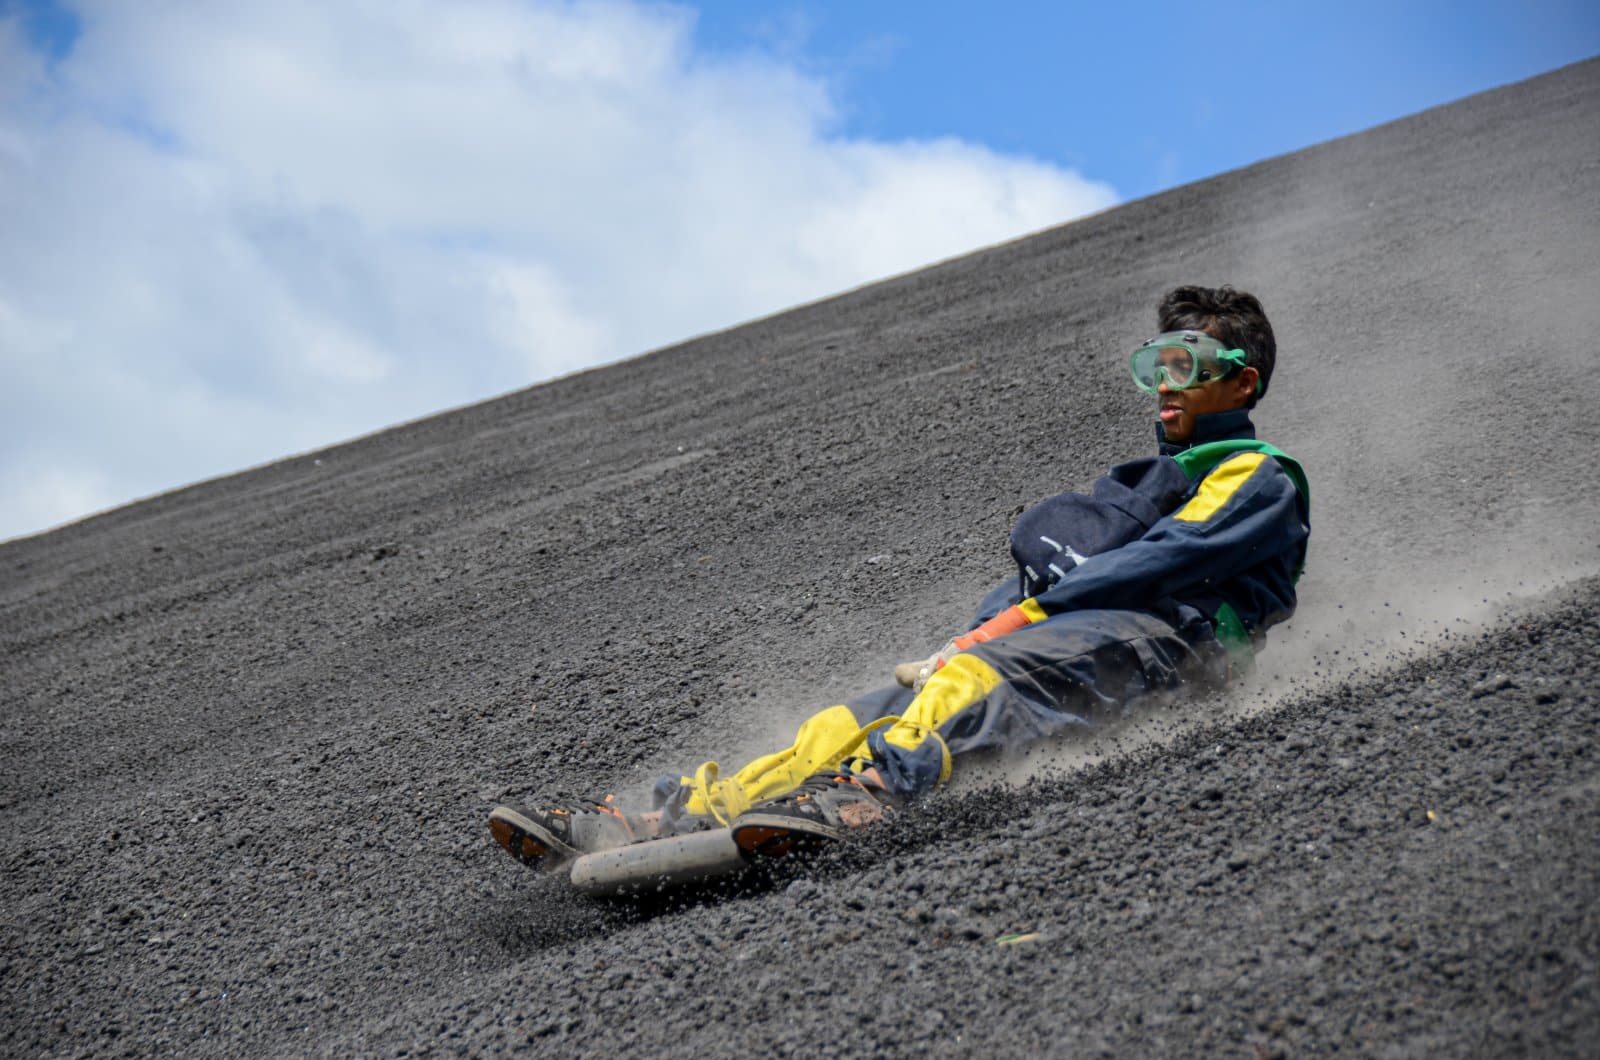 <p class="wp-caption-text">Image Credit: Shutterstock / OlgaPS</p>  <p>Embrace your inner daredevil and hurtle down the ash-covered slopes of Cerro Negro on a volcano boarding excursion in Nicaragua. Strap on a board, take a deep breath, and let gravity propel you down the steep inclines of one of the world’s most active volcanoes.</p>